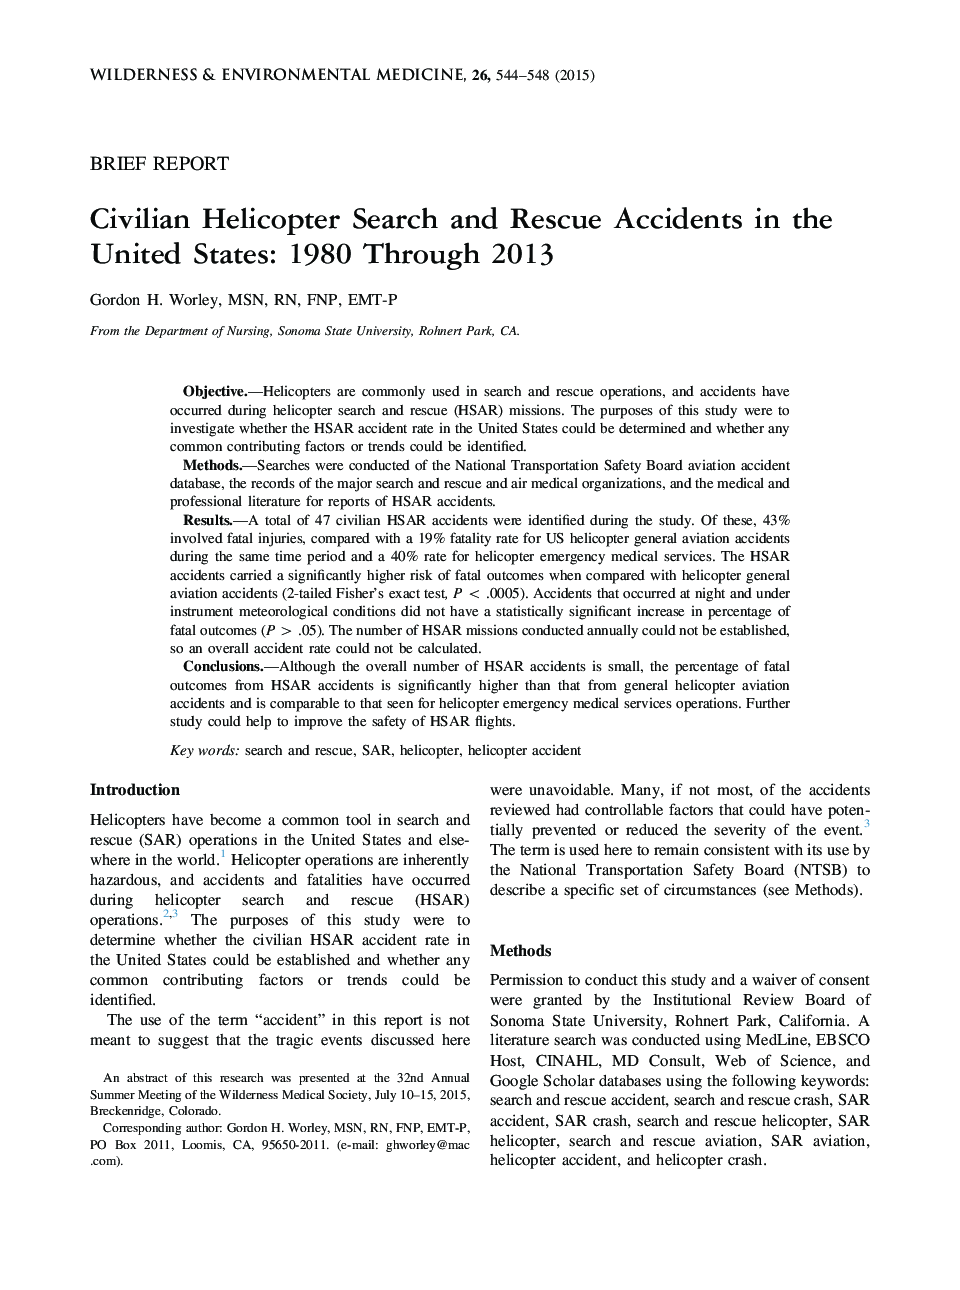 Civilian Helicopter Search and Rescue Accidents in the United States: 1980 Through 2013 